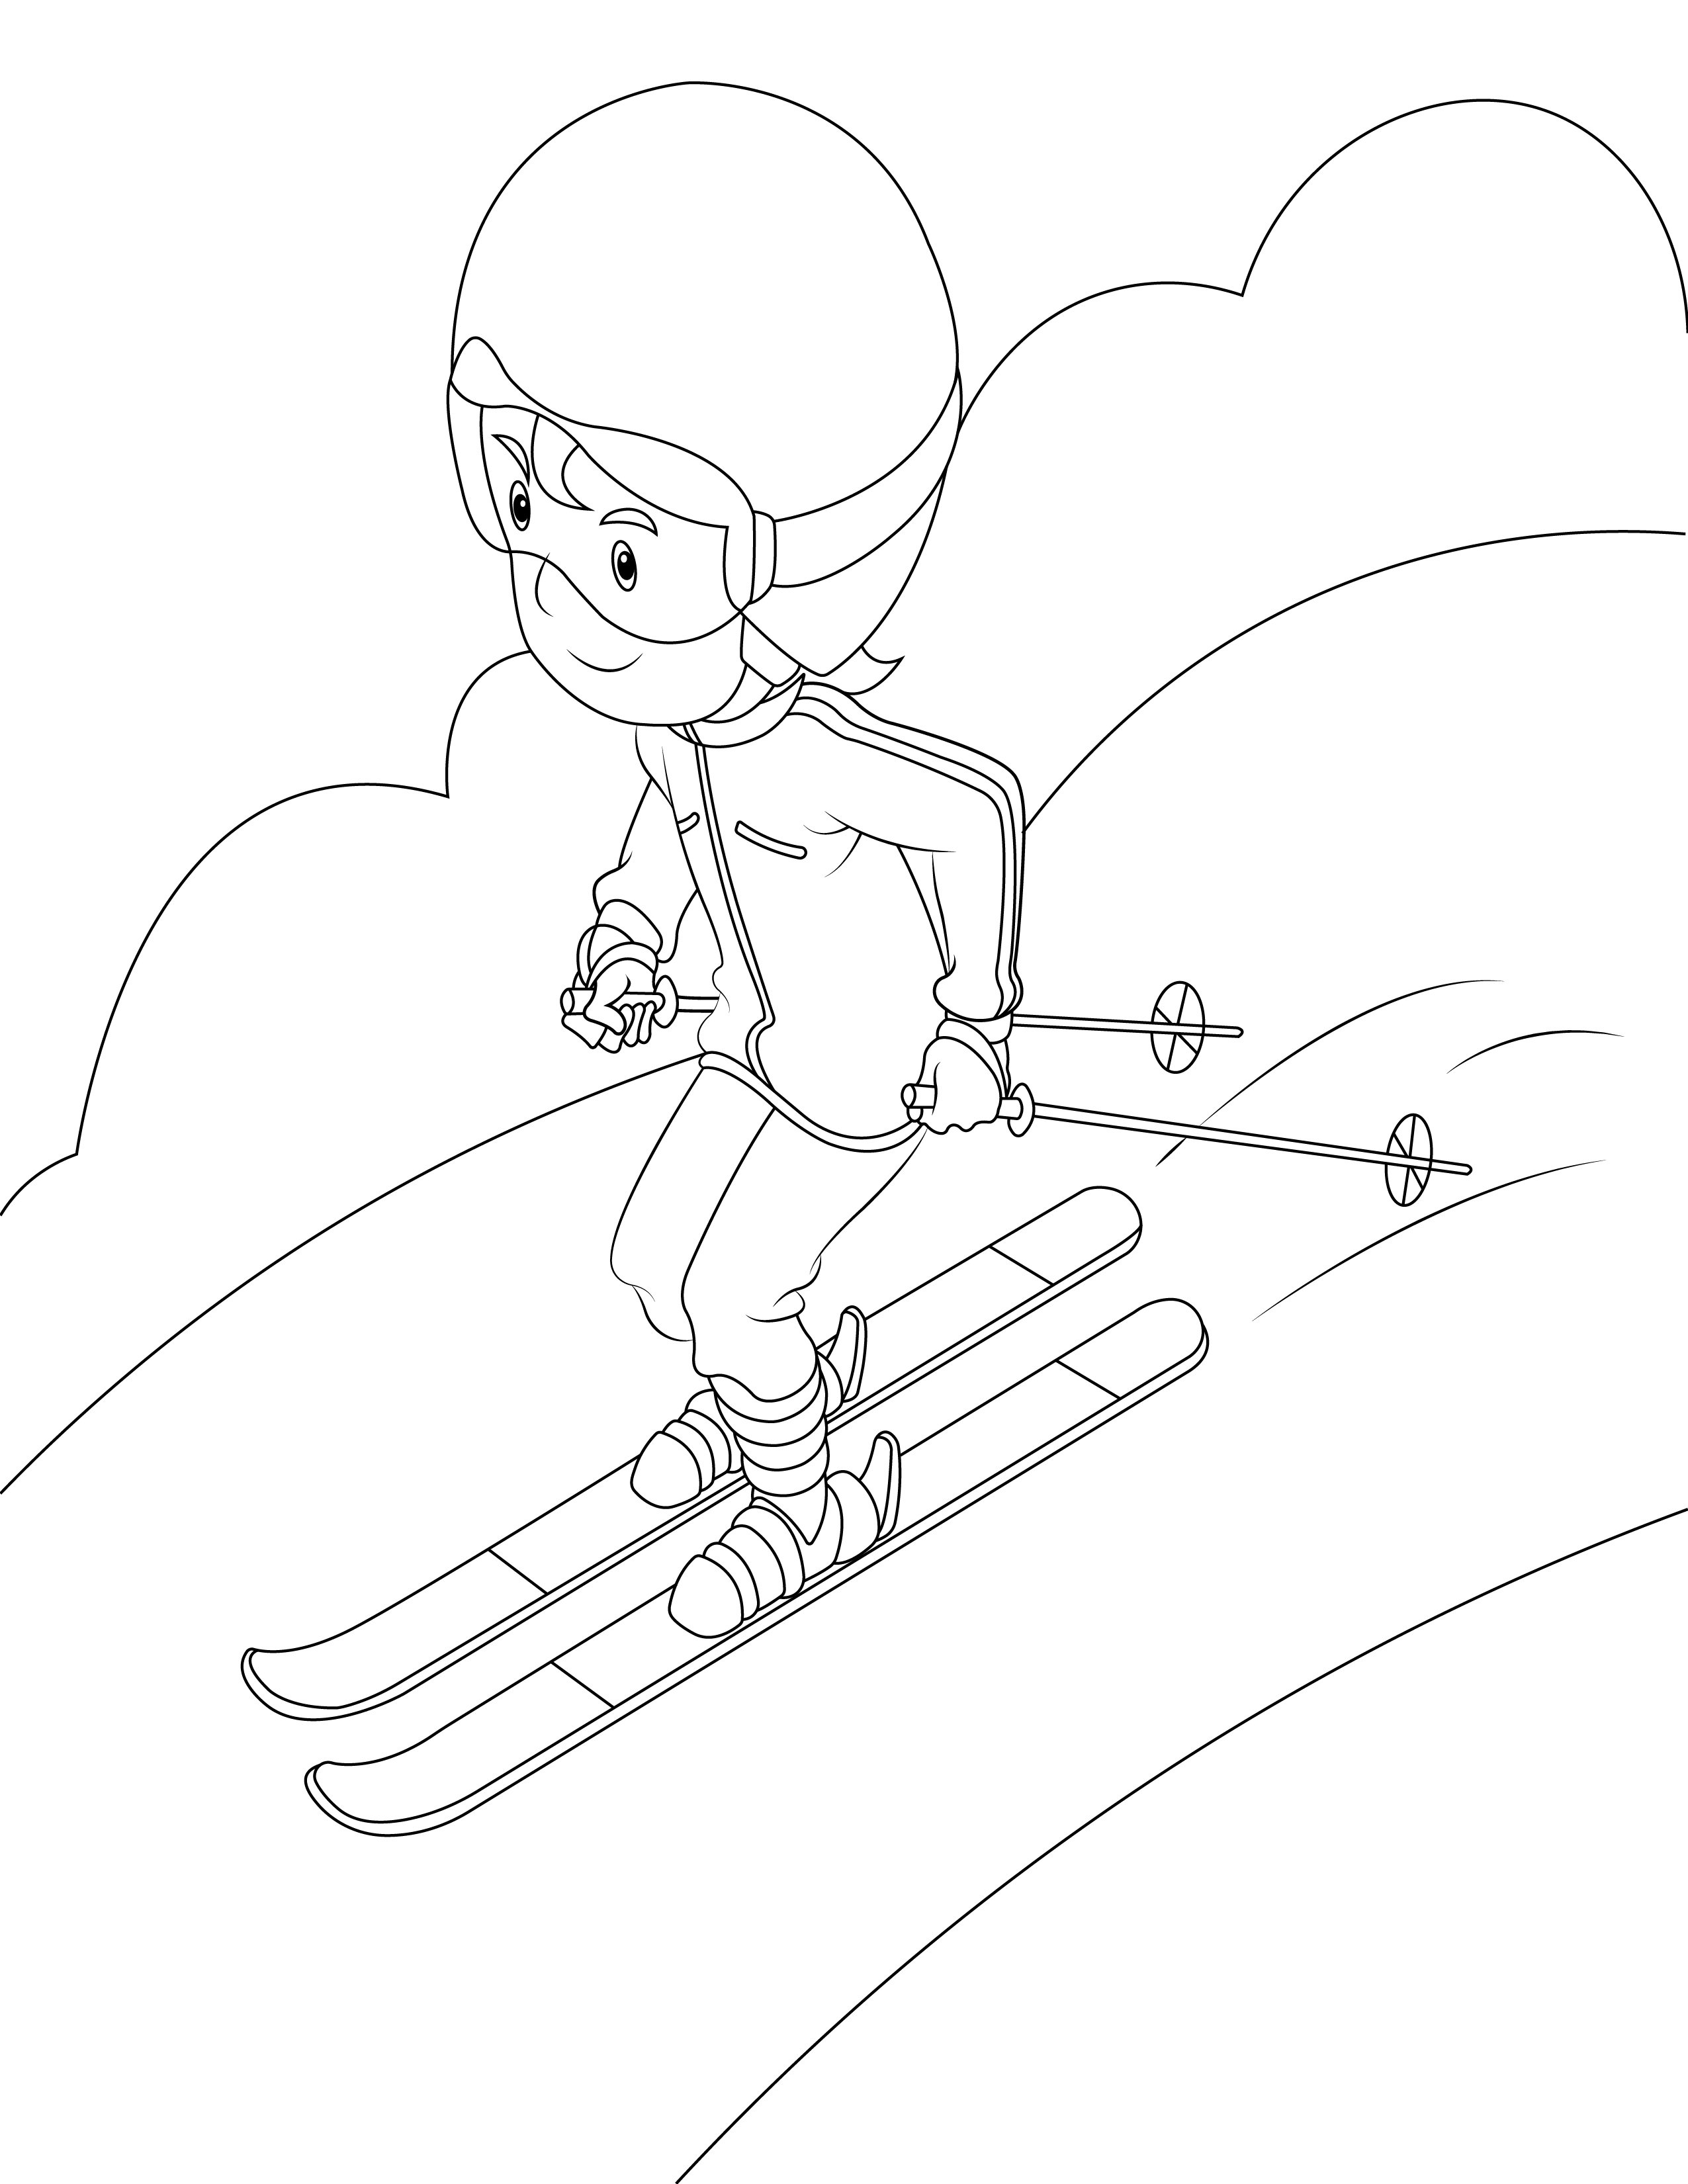 Child skier coloring page